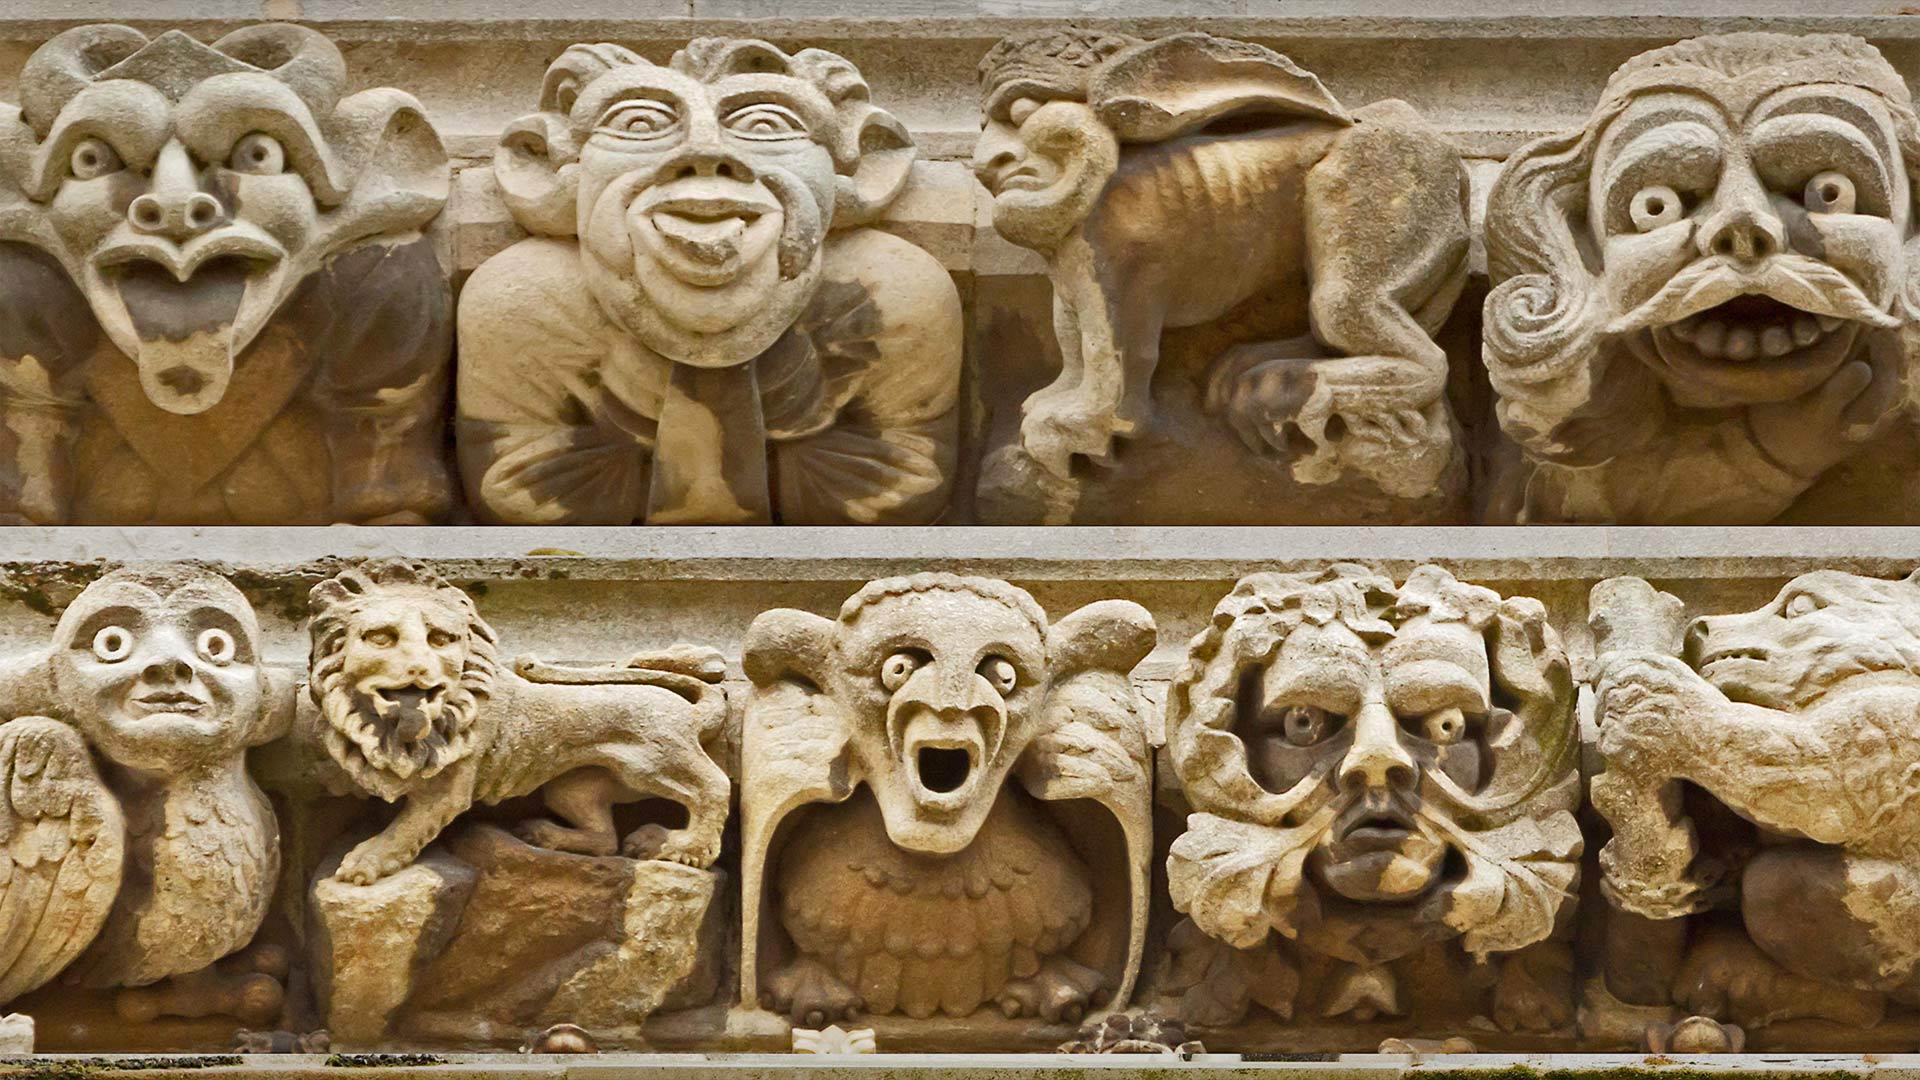 Grotesques at York Minster, North Yorkshire, England - John Potter/Alamy)